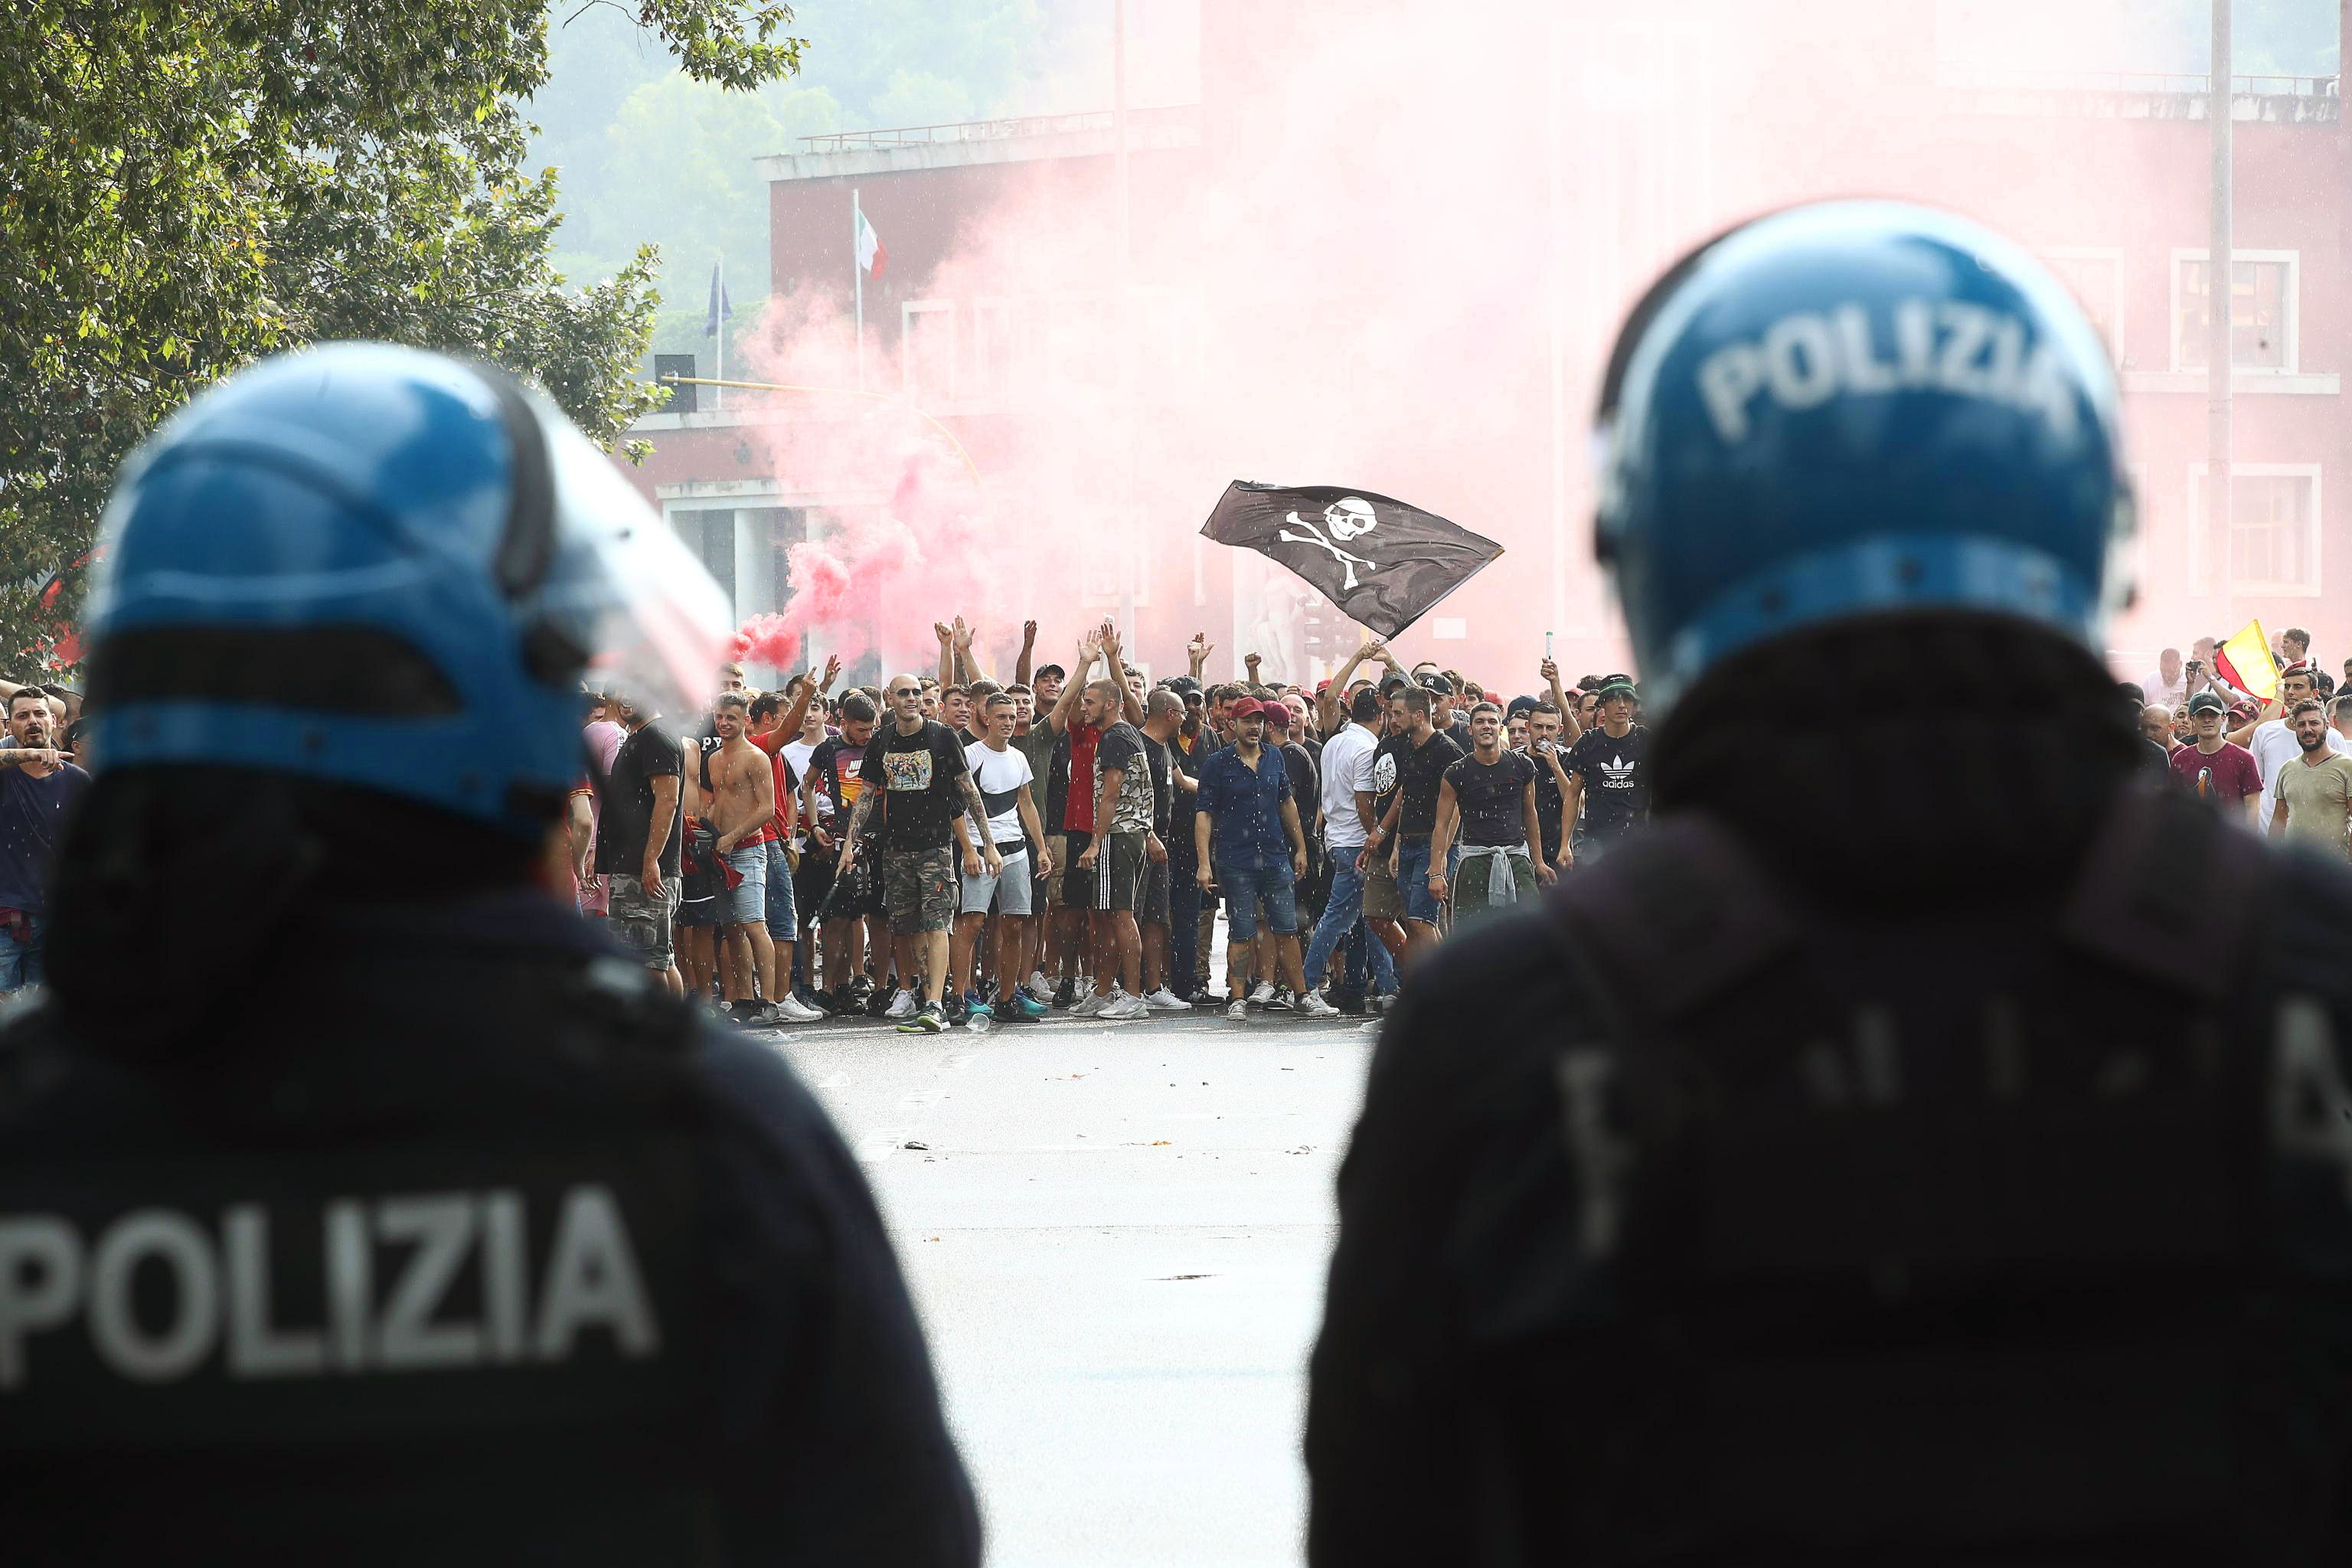 epa07810221 Riot police face Roma supporters near the Olimpico stadium in Rome, Italy, 01 September 2019, prior to the Italian Serie A soccer derby between SS Lazio and AS Roma.  EPA/MASSIMO PERCOSSI